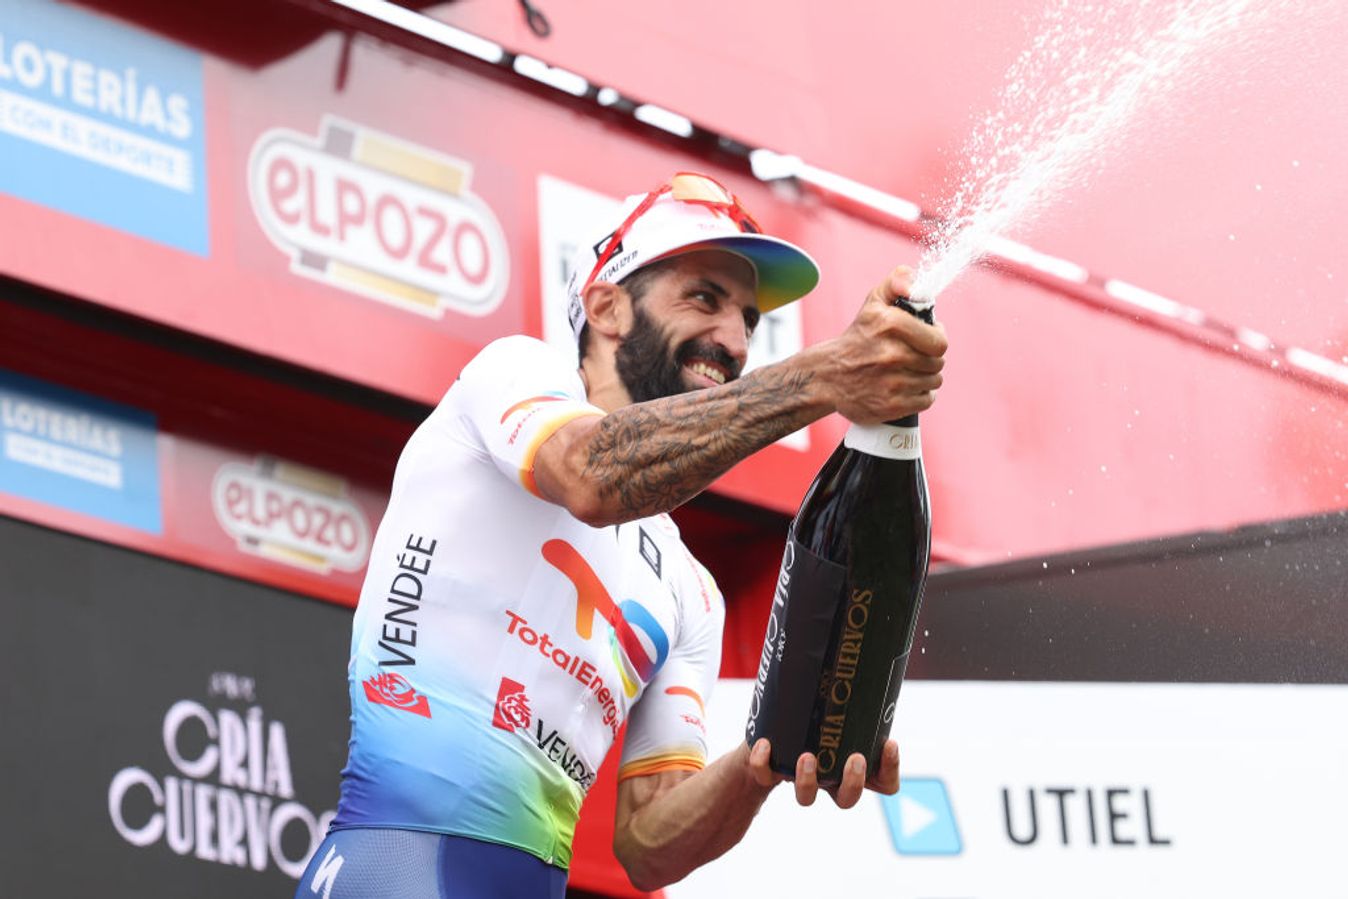 Geoffrey Soupe on the podium after winning stage 7 of the Vuelta a España